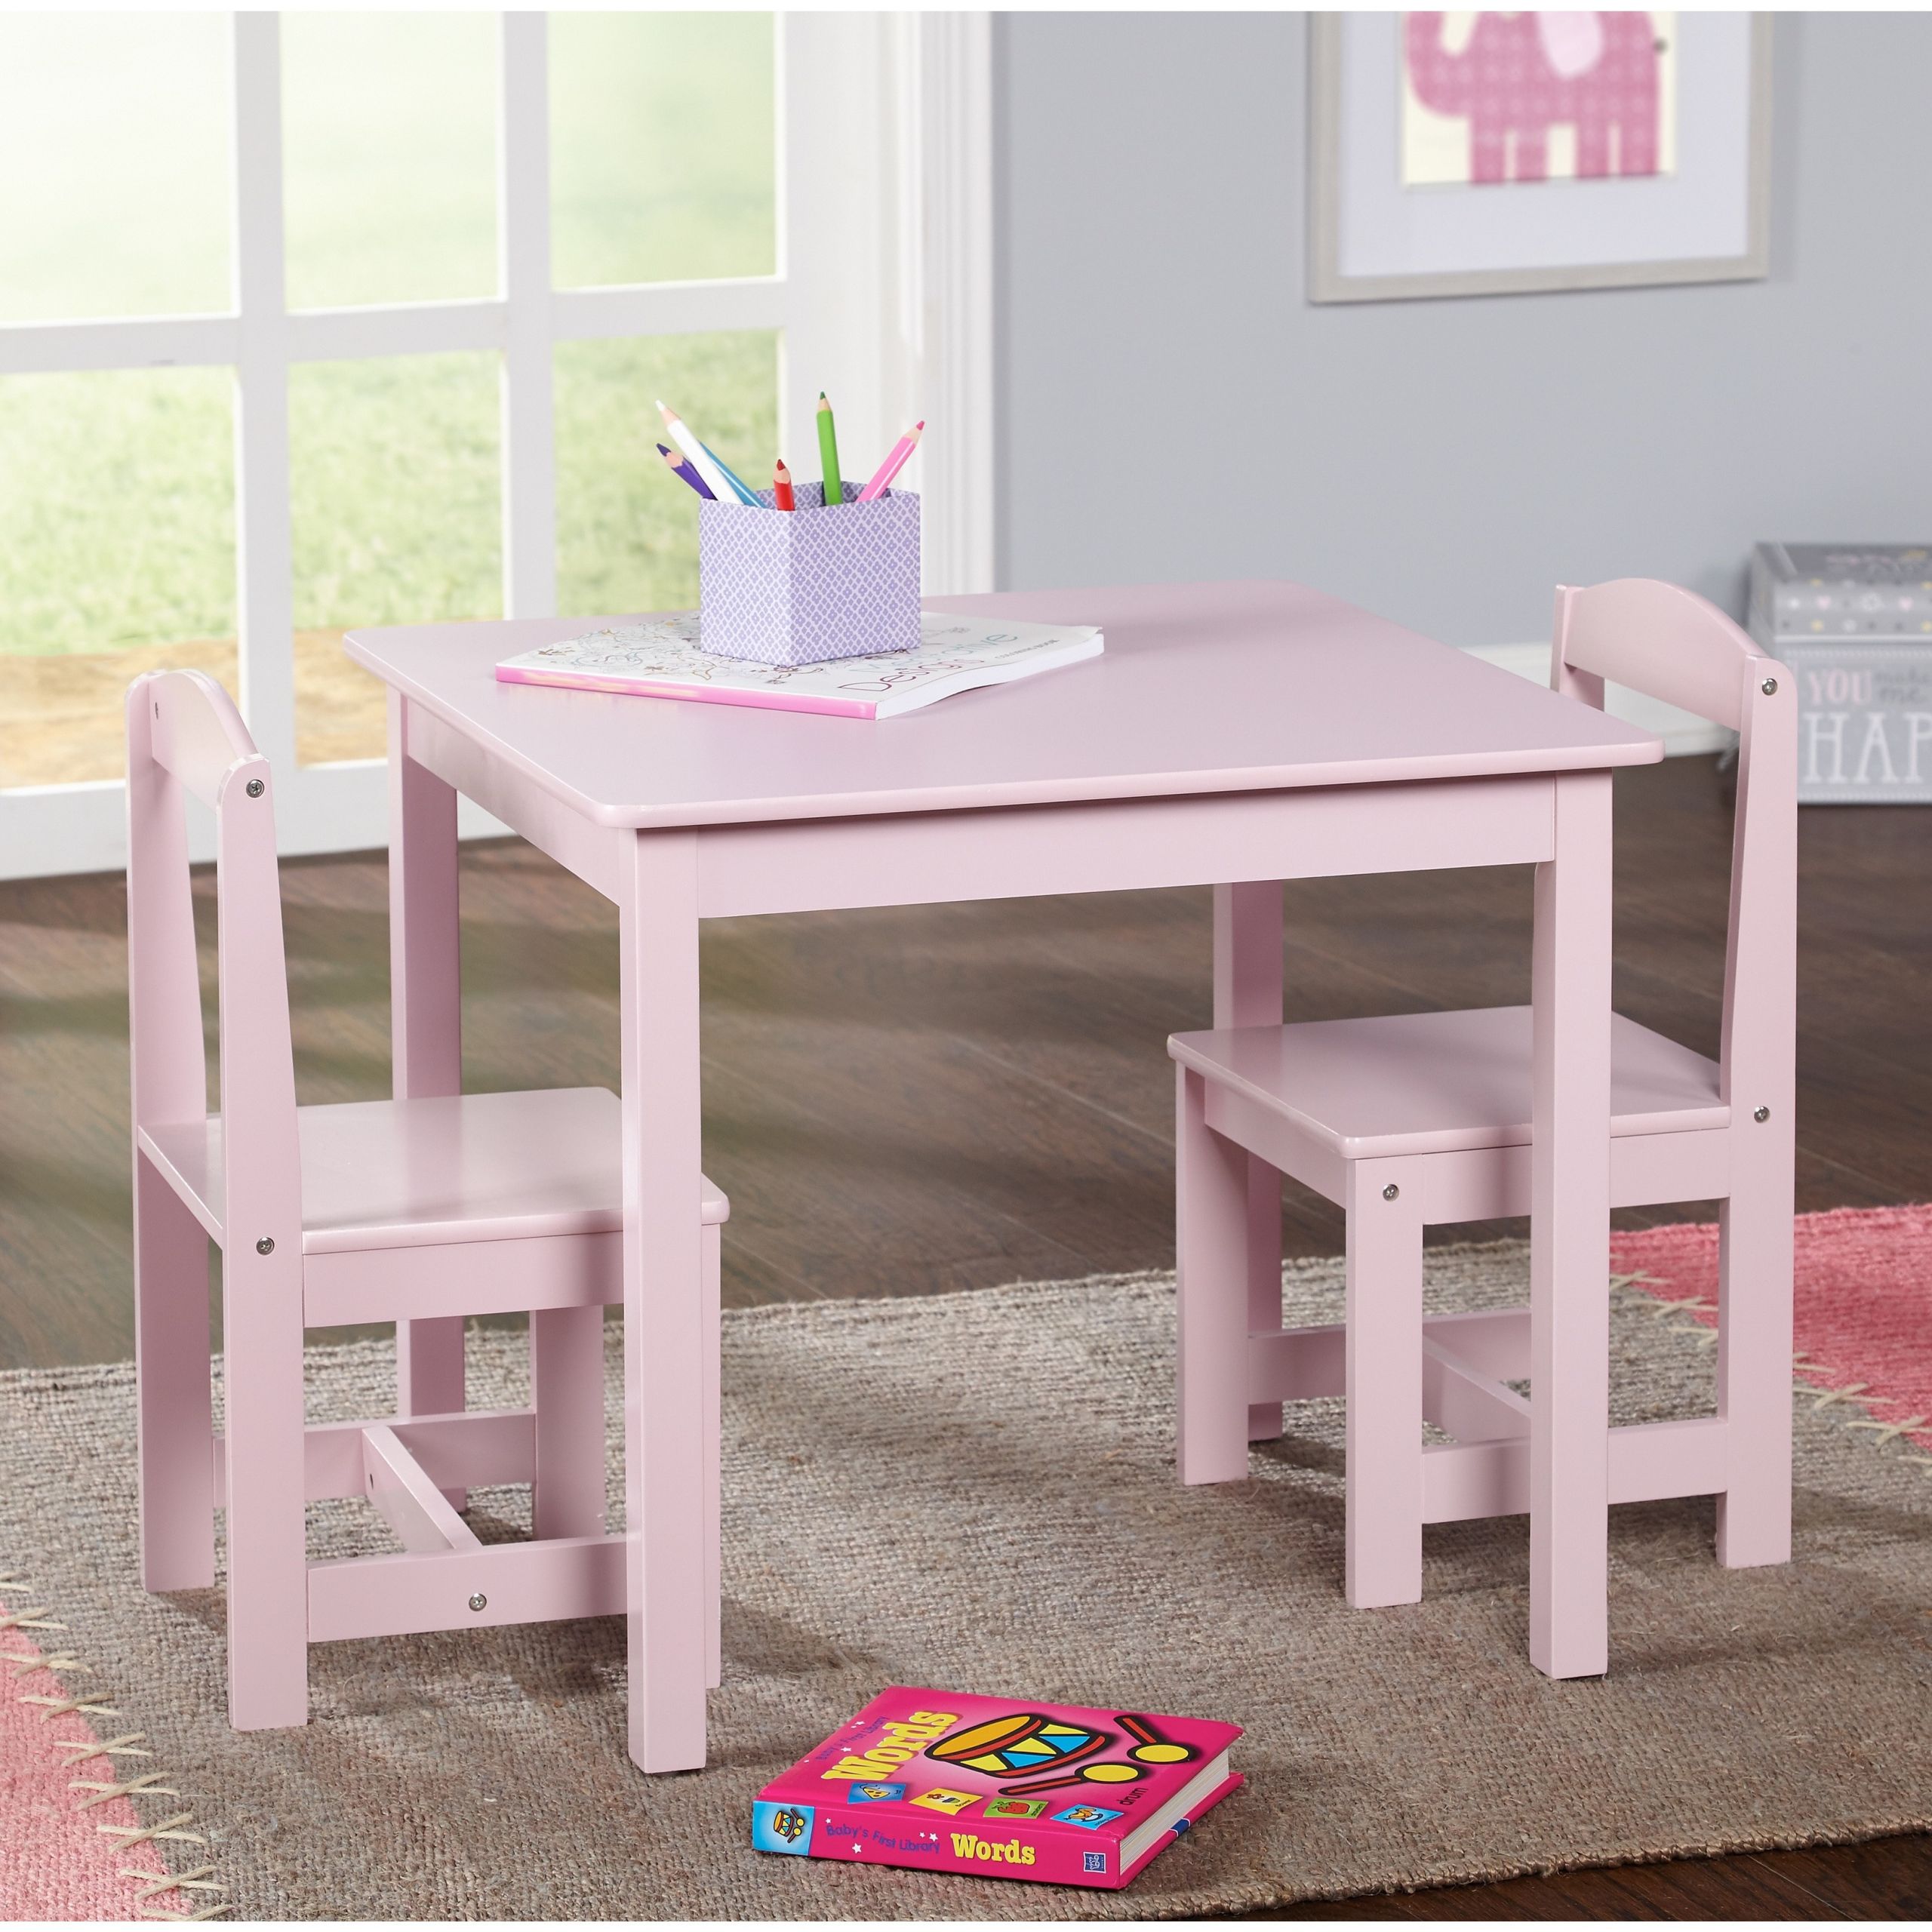 Modern Kids Table And Chair
 Kids Craft Table Modern And Chairs Children Activity